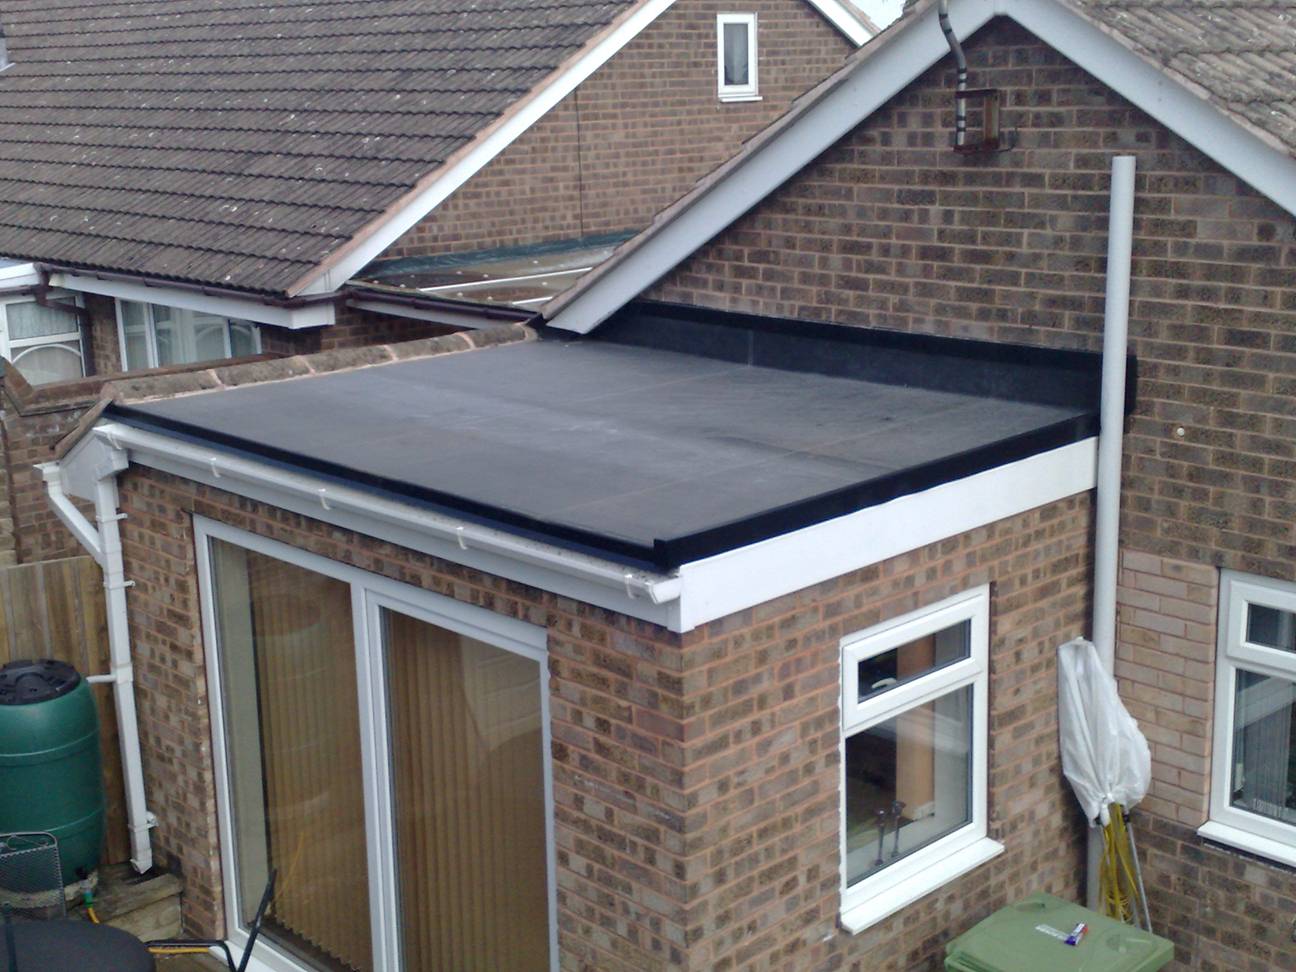 Flat Roof Home Extension Epdm roofing